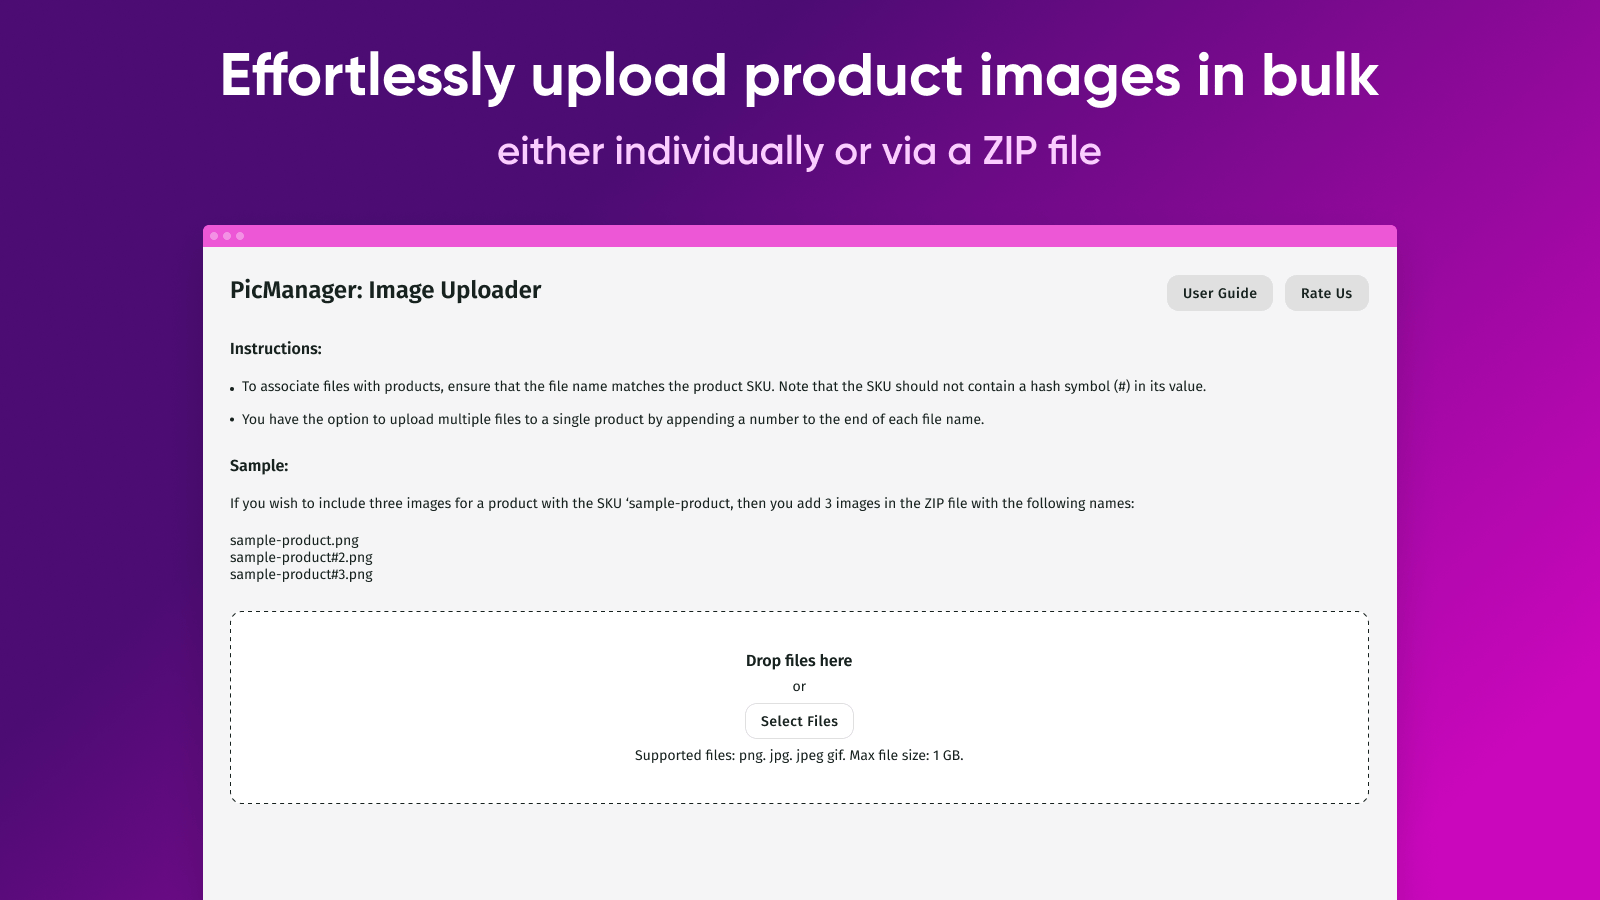 Bulk upload images individually or as a ZIP file